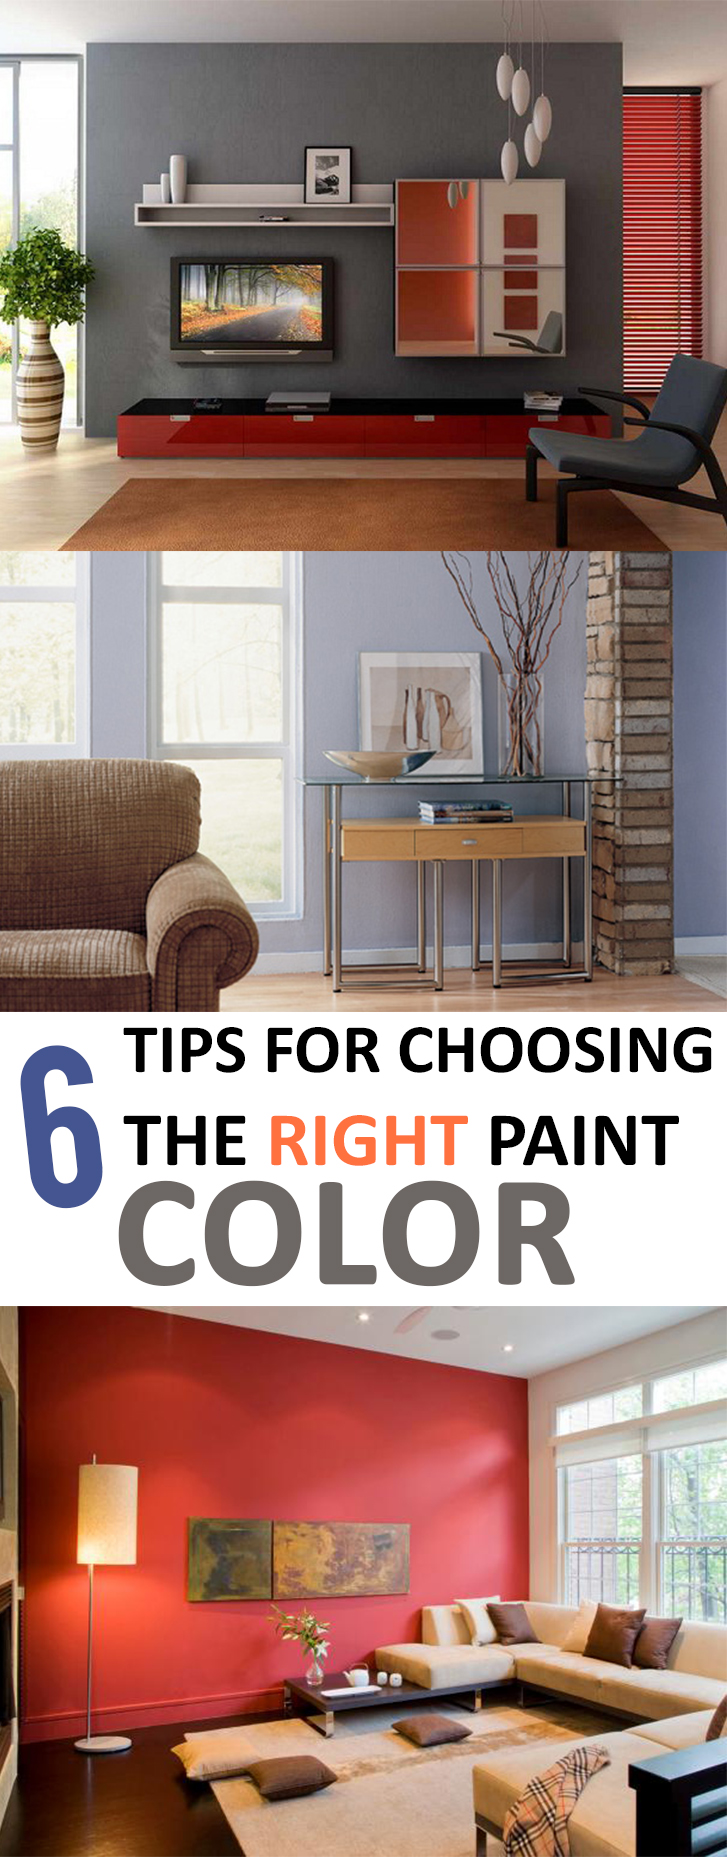 6 Tips for Choosing the Right Paint Color Sunlit Spaces DIY Home